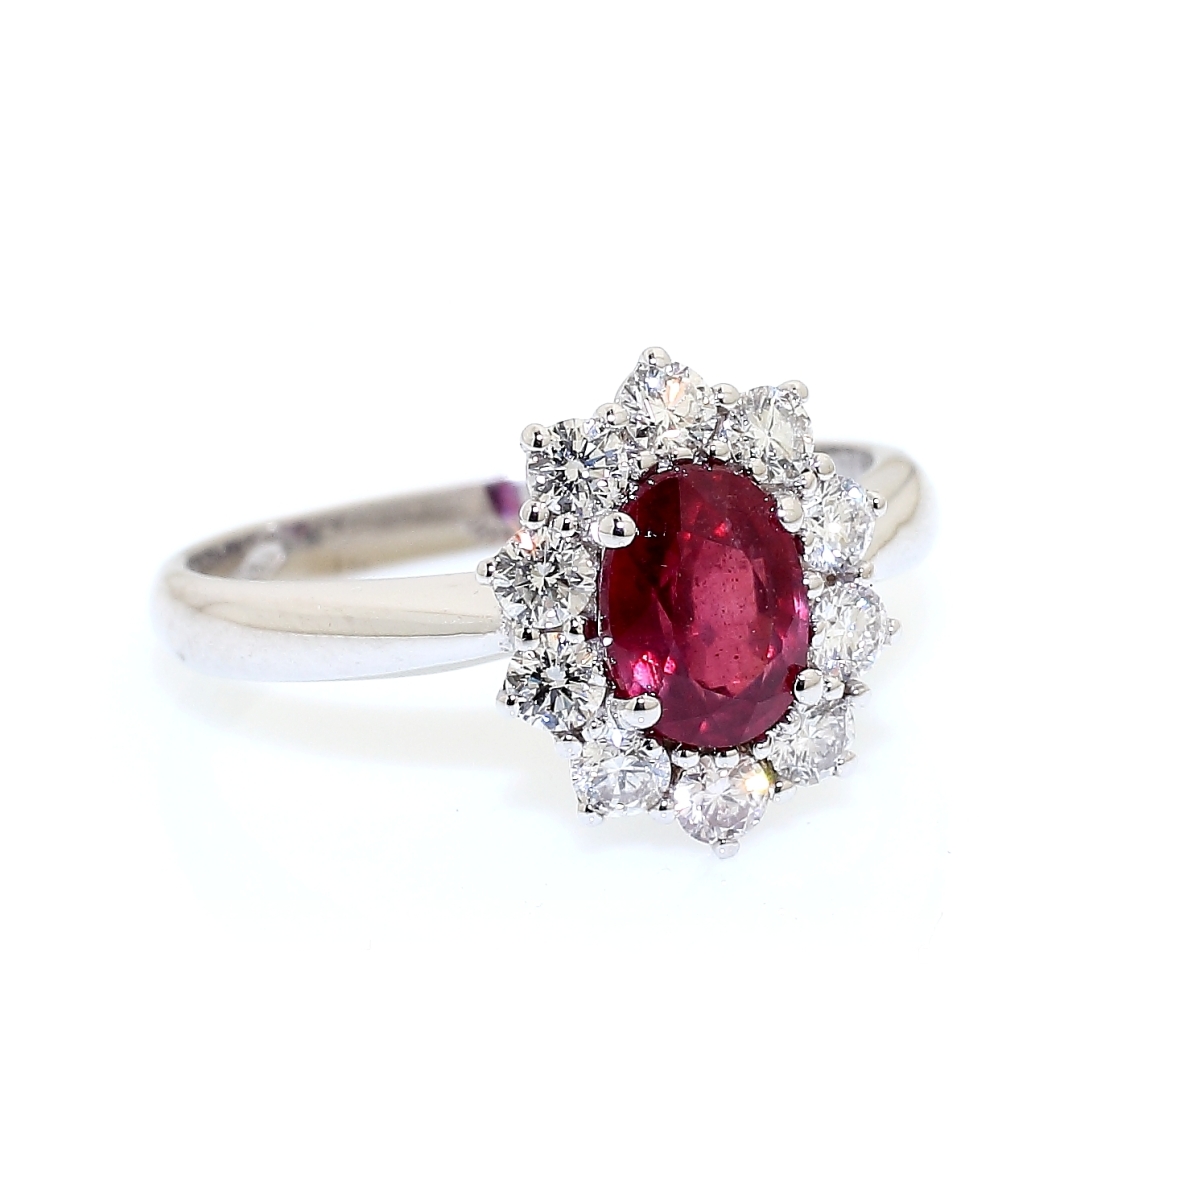 750 Mill. White Gold Ring with 0,53 Ct. Diamonds and 1,21 Ct. Ruby